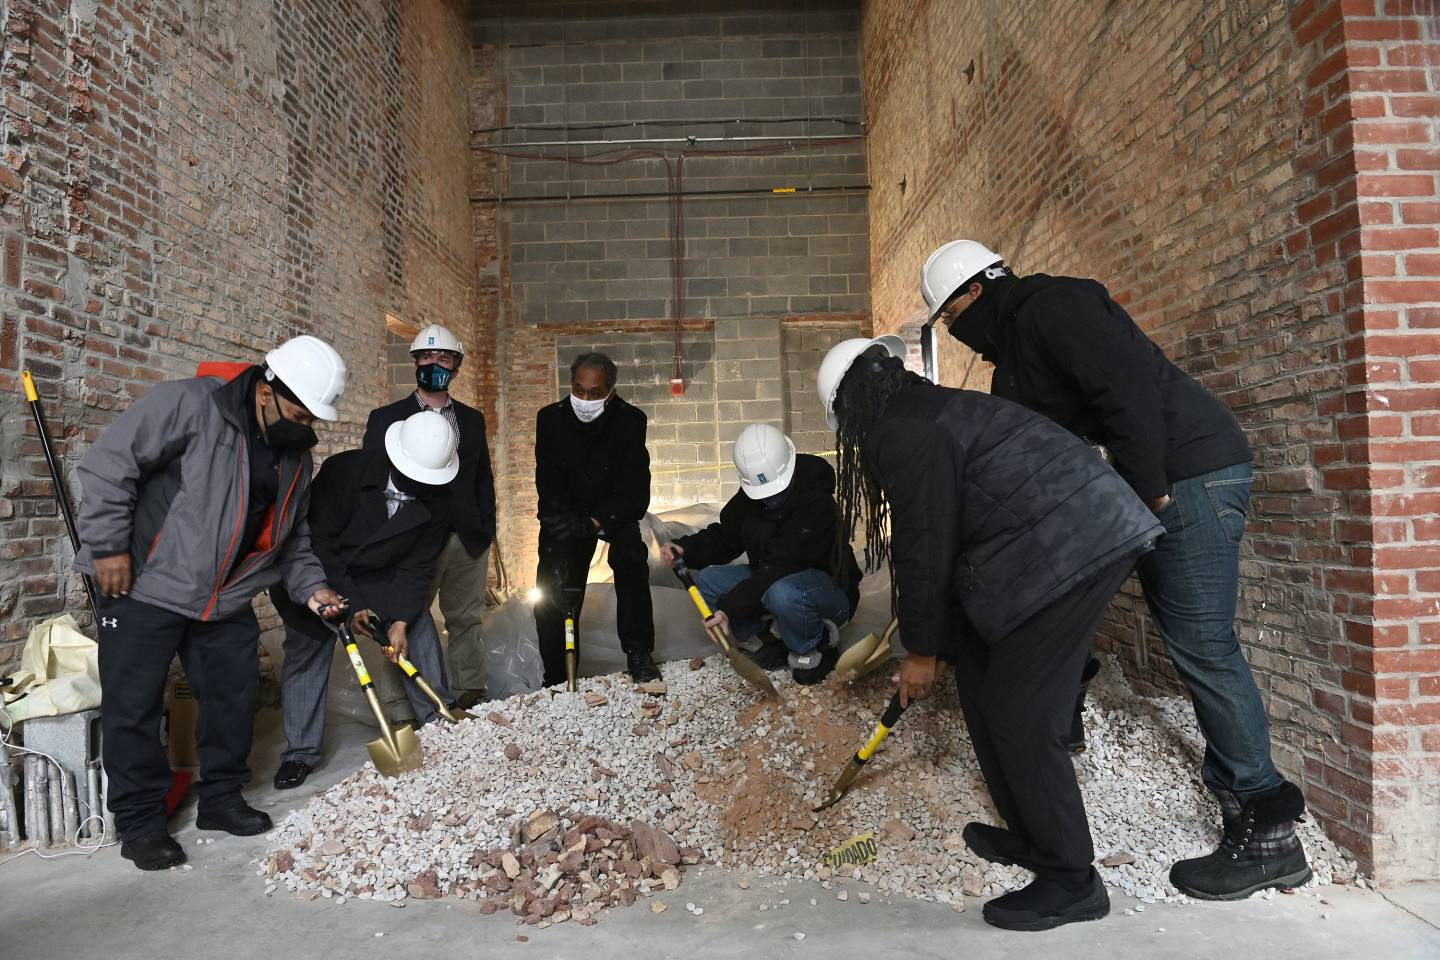 Community leaders and developers shovel brick dust in an empty row home